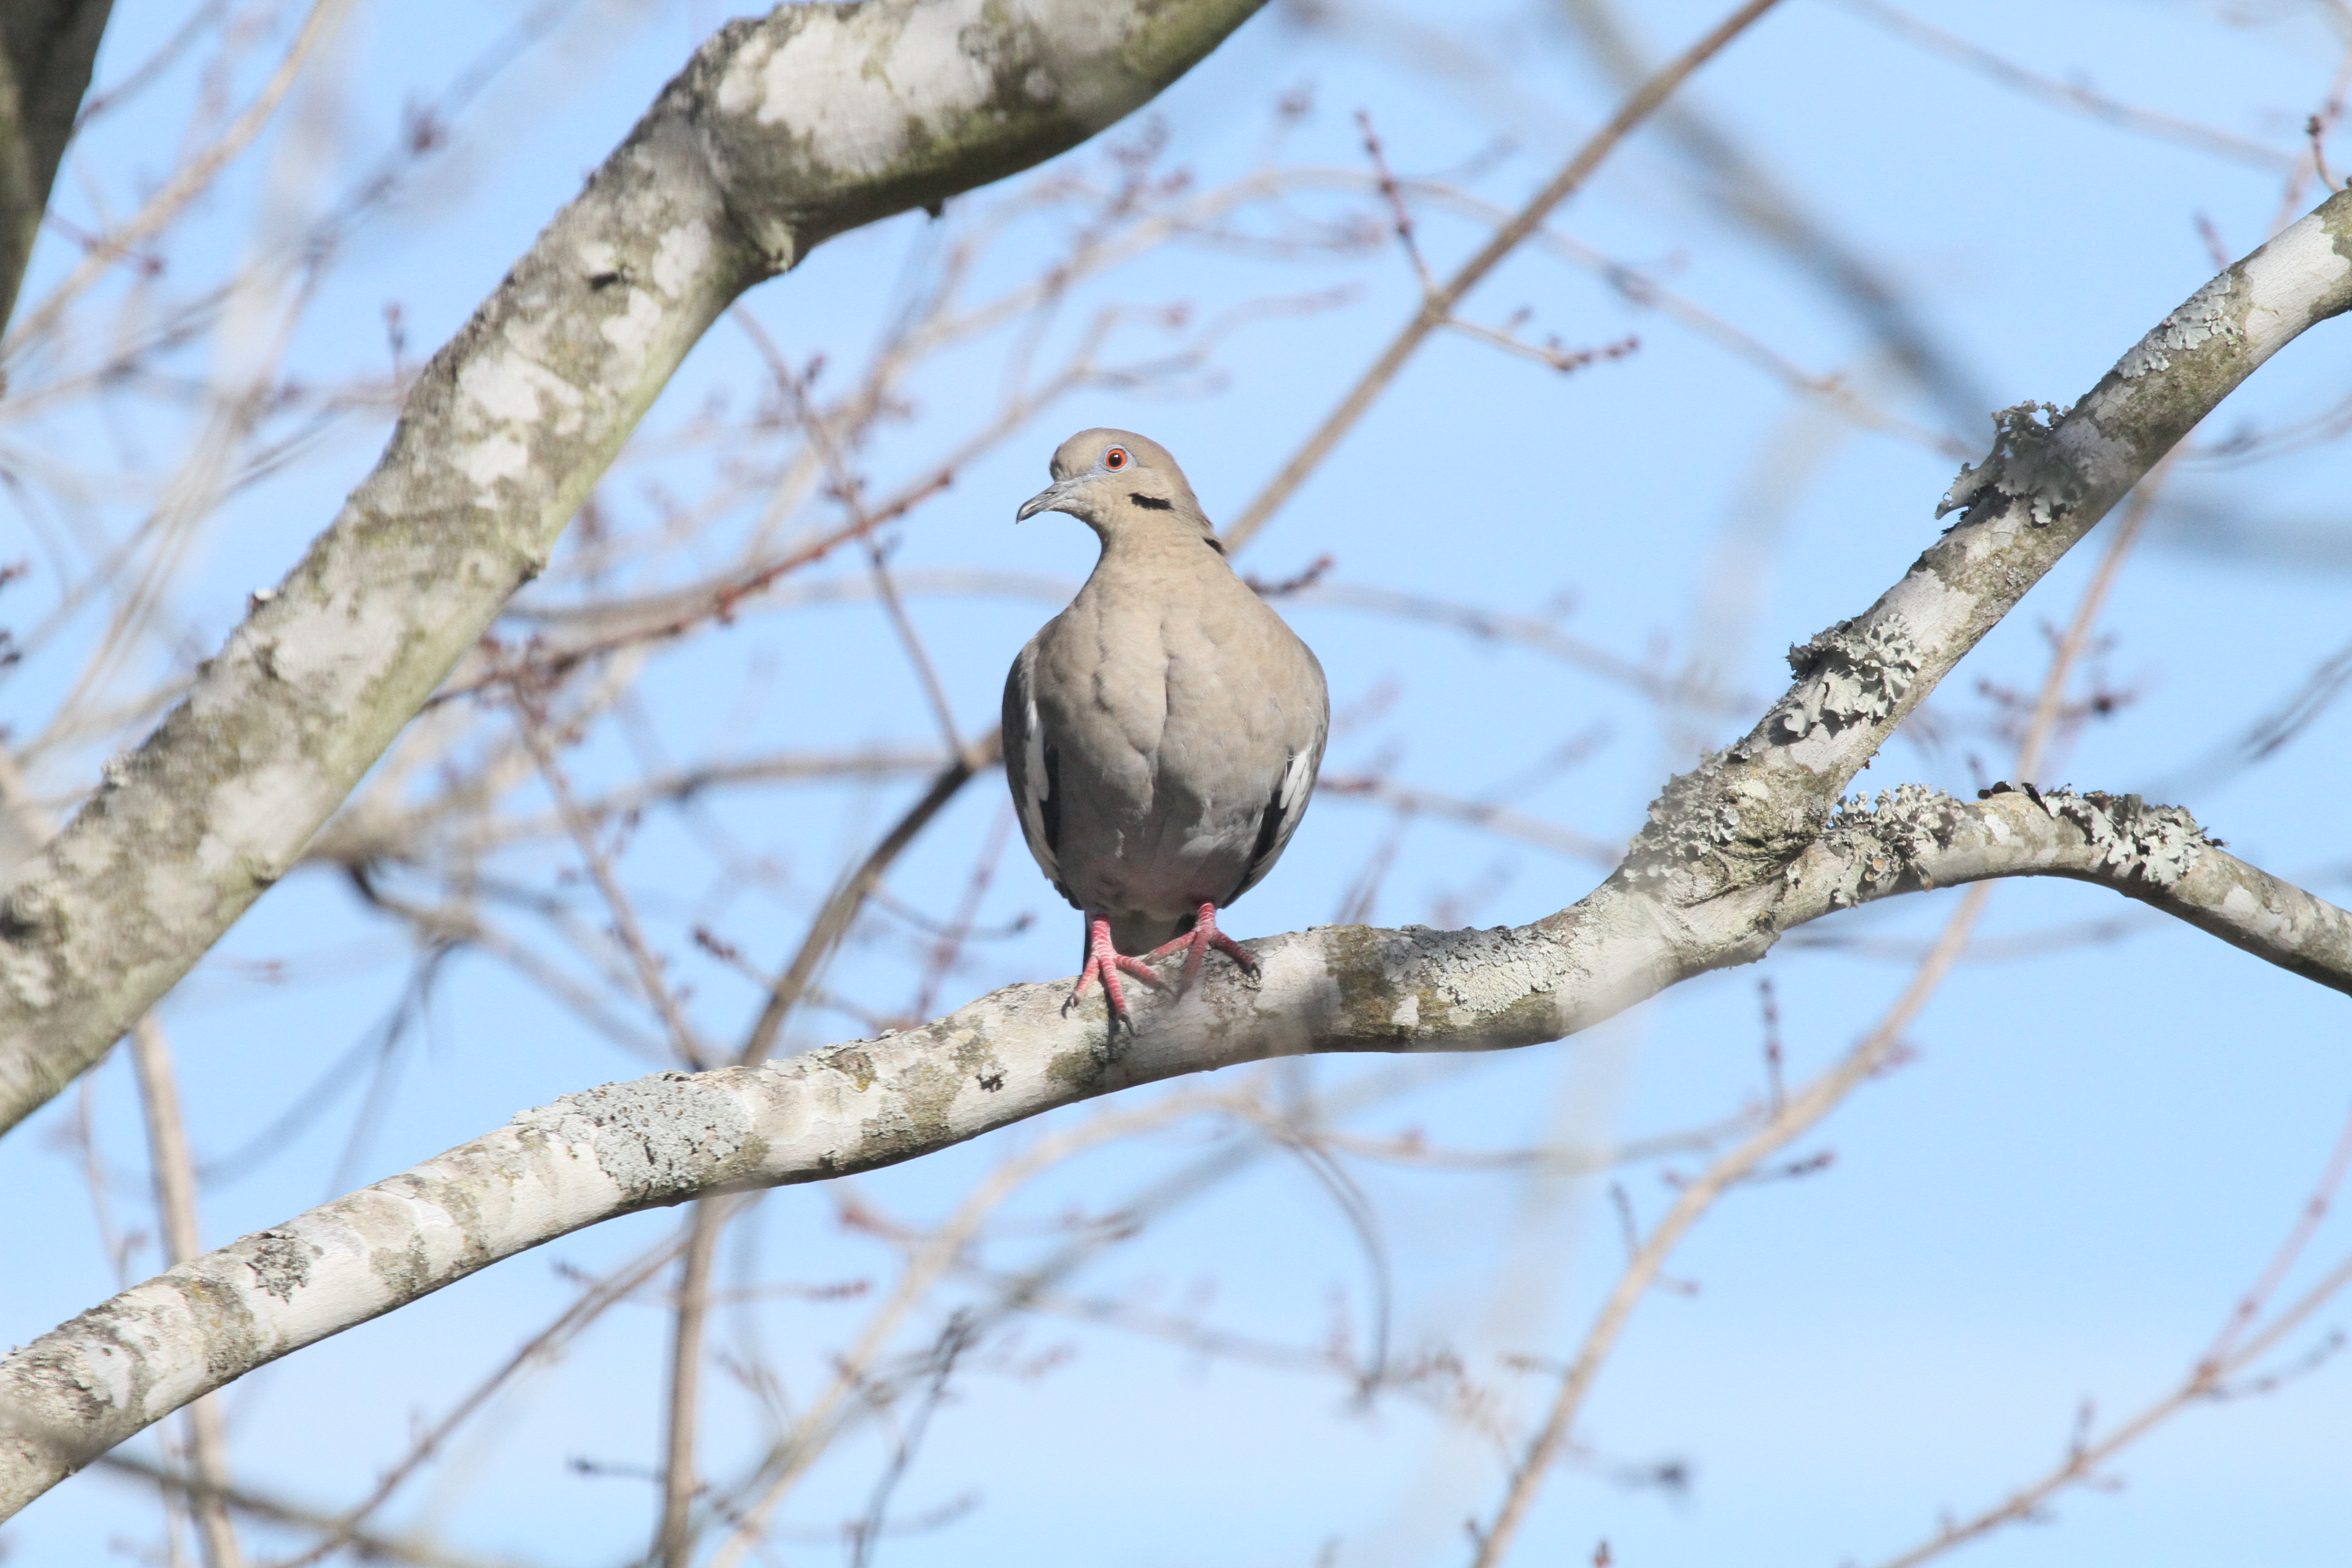 White-winged Dove in Clarksville- you can see the white wing edges on both sides here.